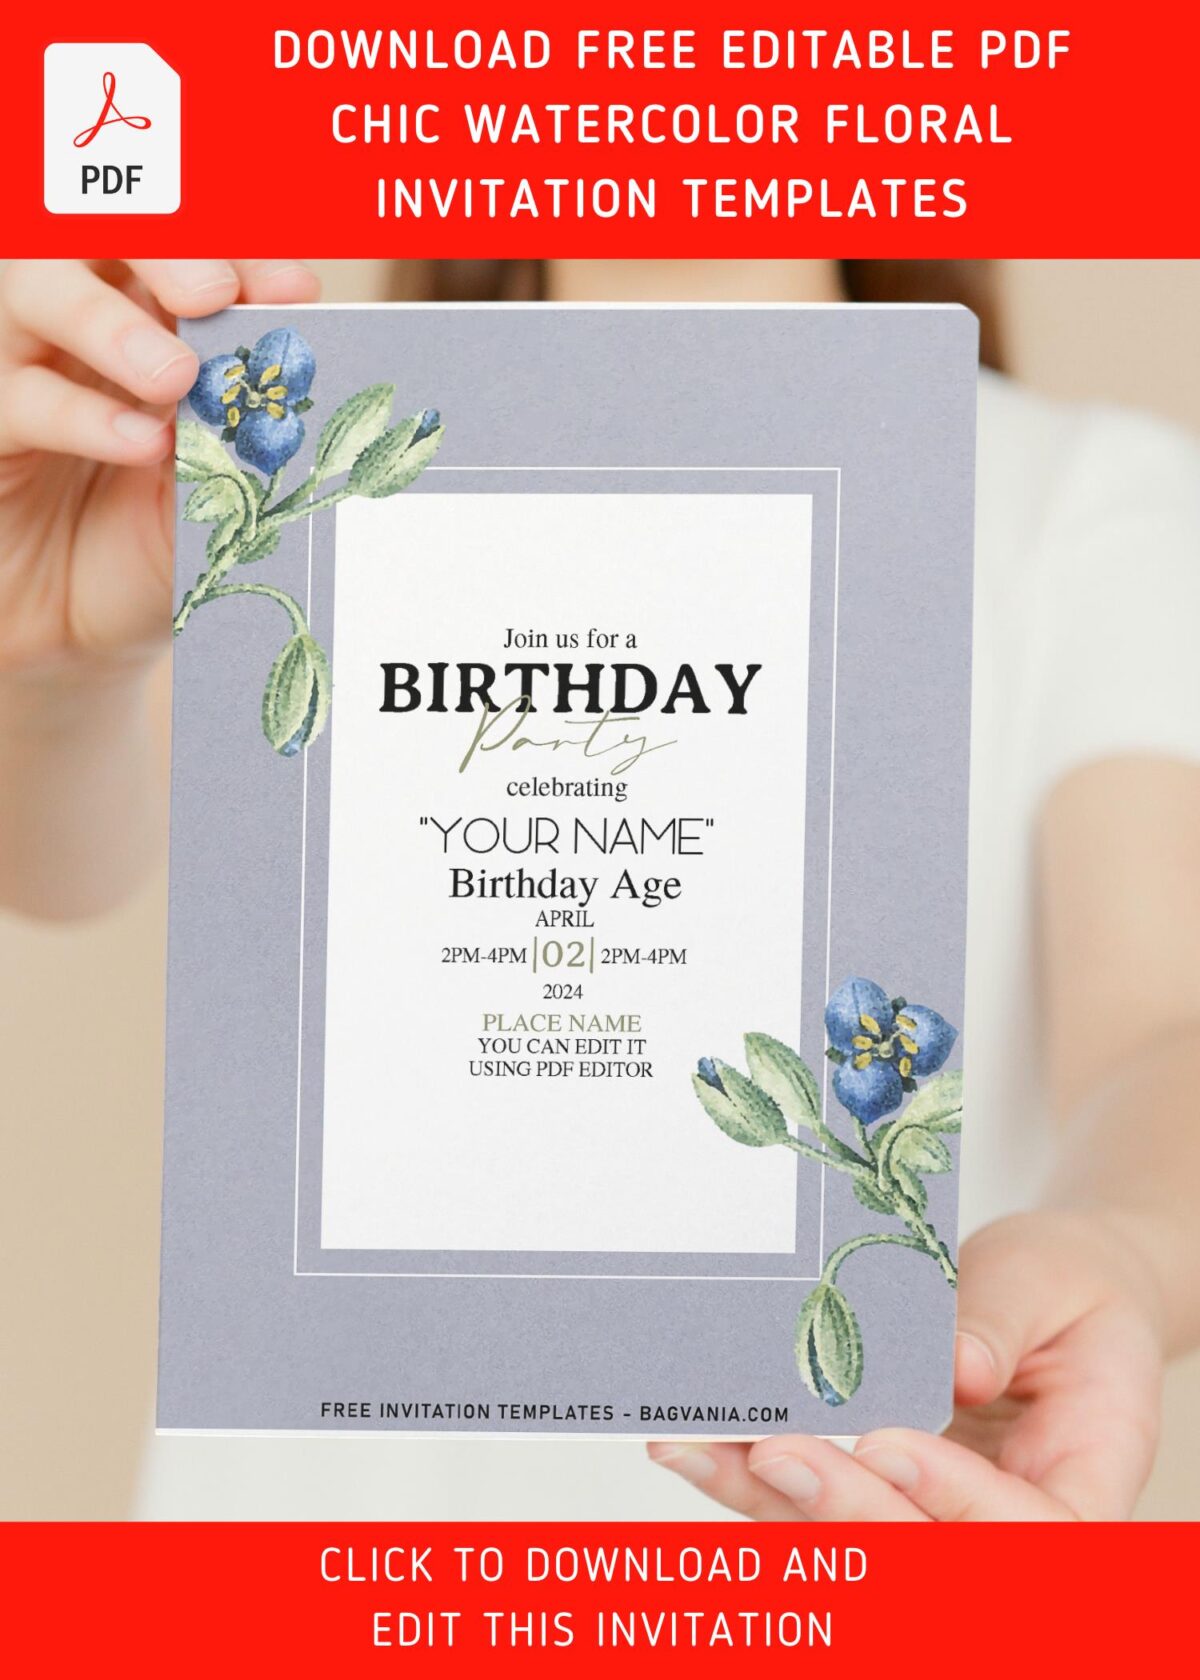 (Free Editable PDF) Garden Romance Floral Birthday Invitation Templates with watercolor lily